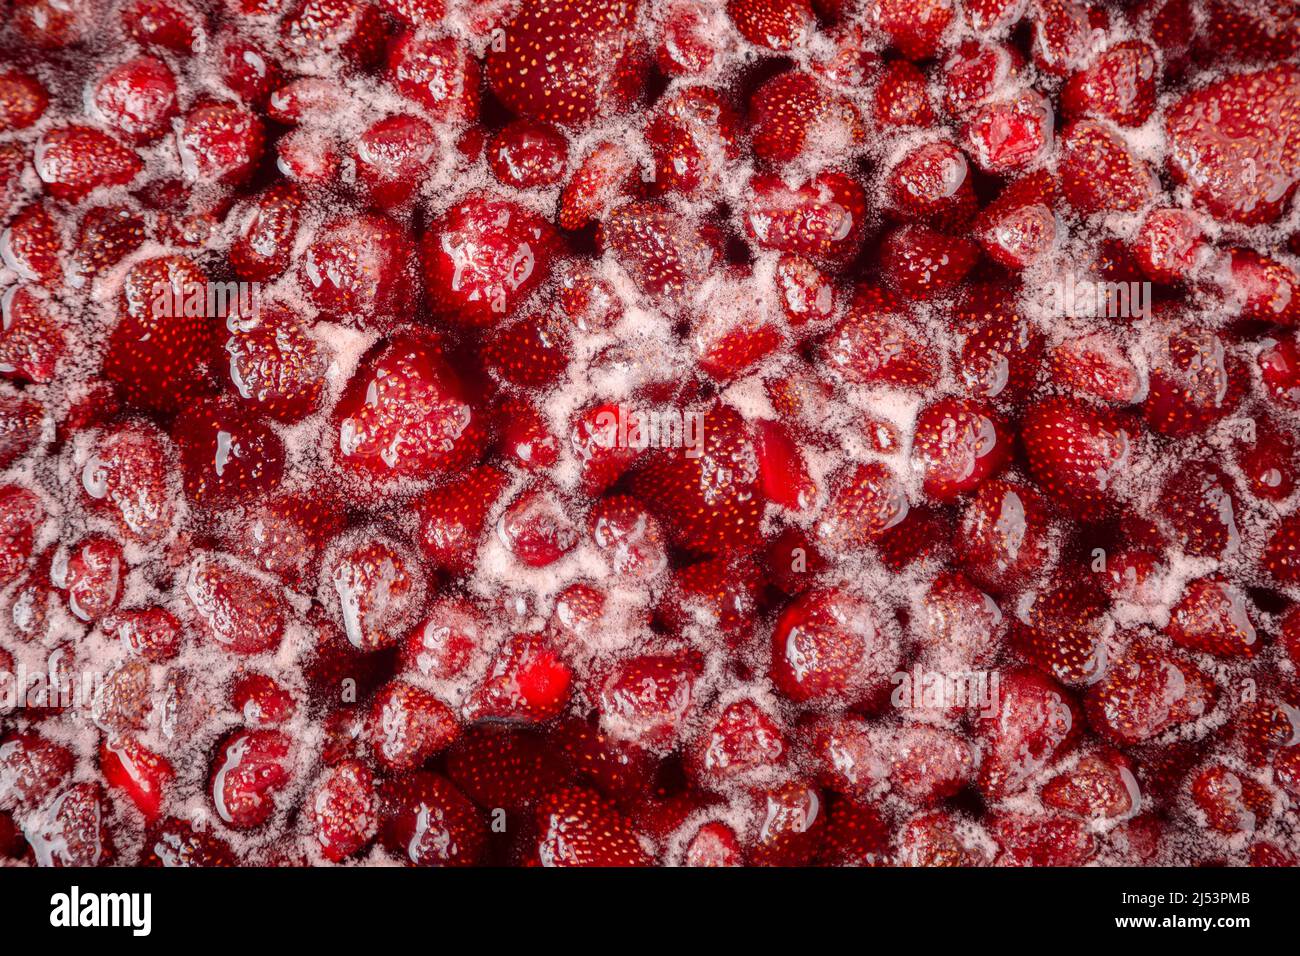 CLOSE UP: Strawberry jam. Make a strawberry jam. Boil strawberries in the pan. Process of cooking, boiling berries for canning. Healthy sweet food. Cooking strawberry jam close up. Stock Photo